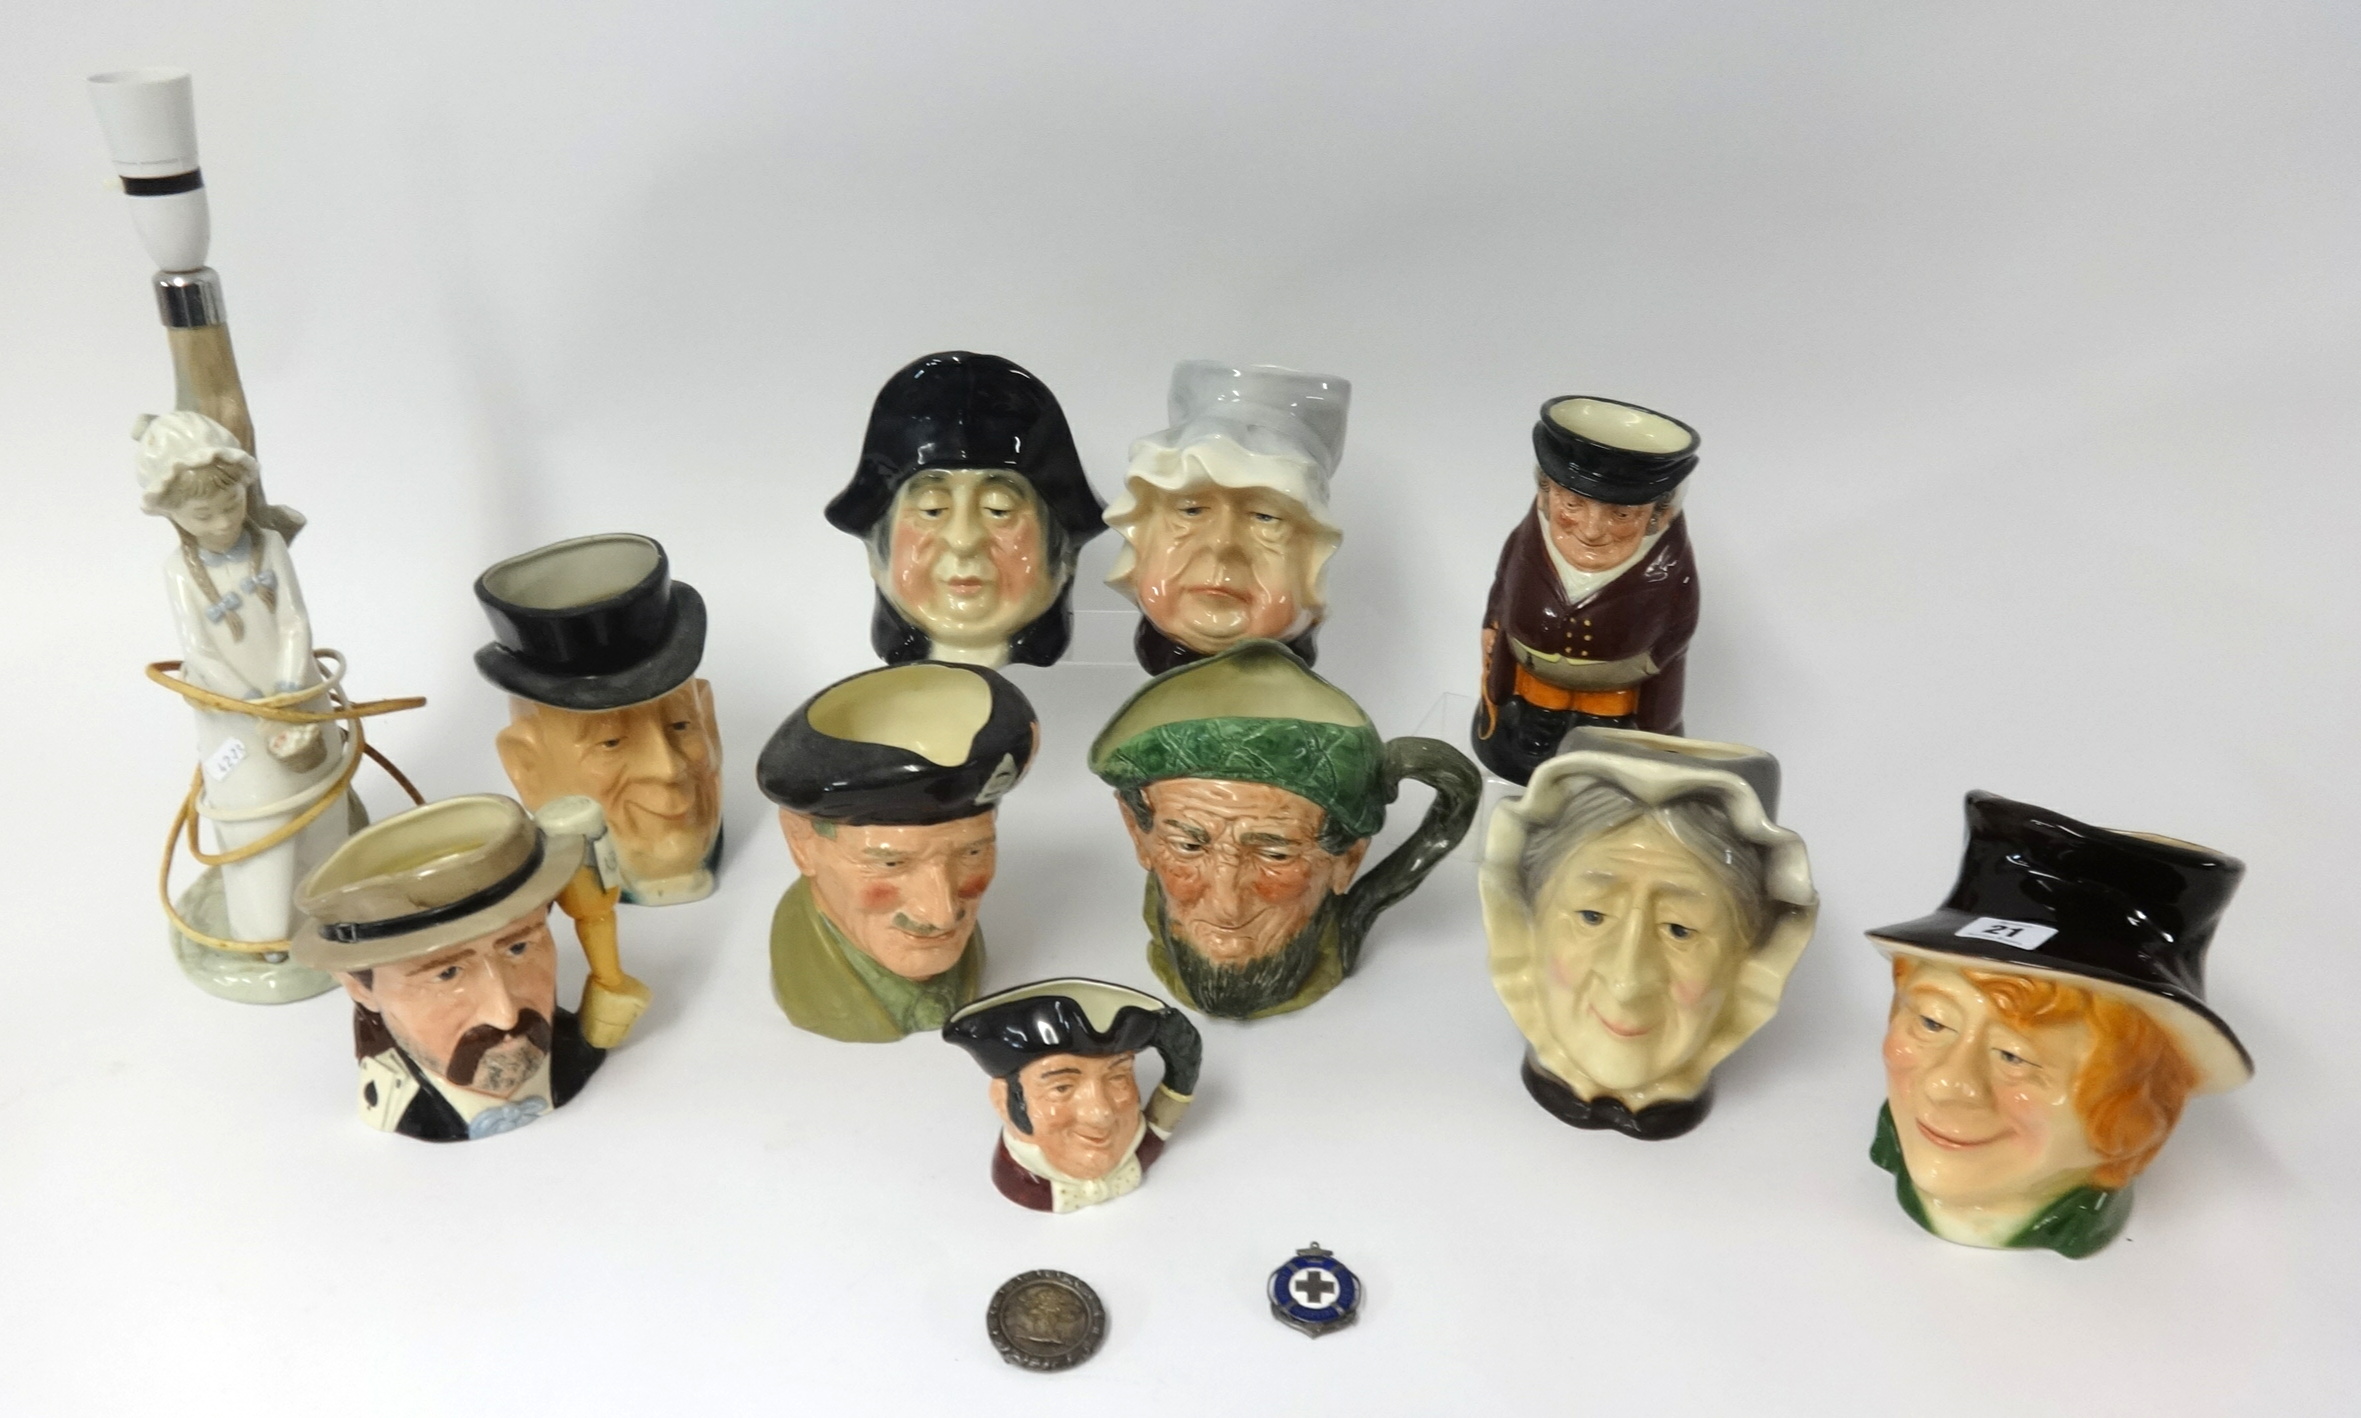 Charles Dickens character jugs also Doulton Monty, Doulton Wild West, a Toby jug and Nao figure